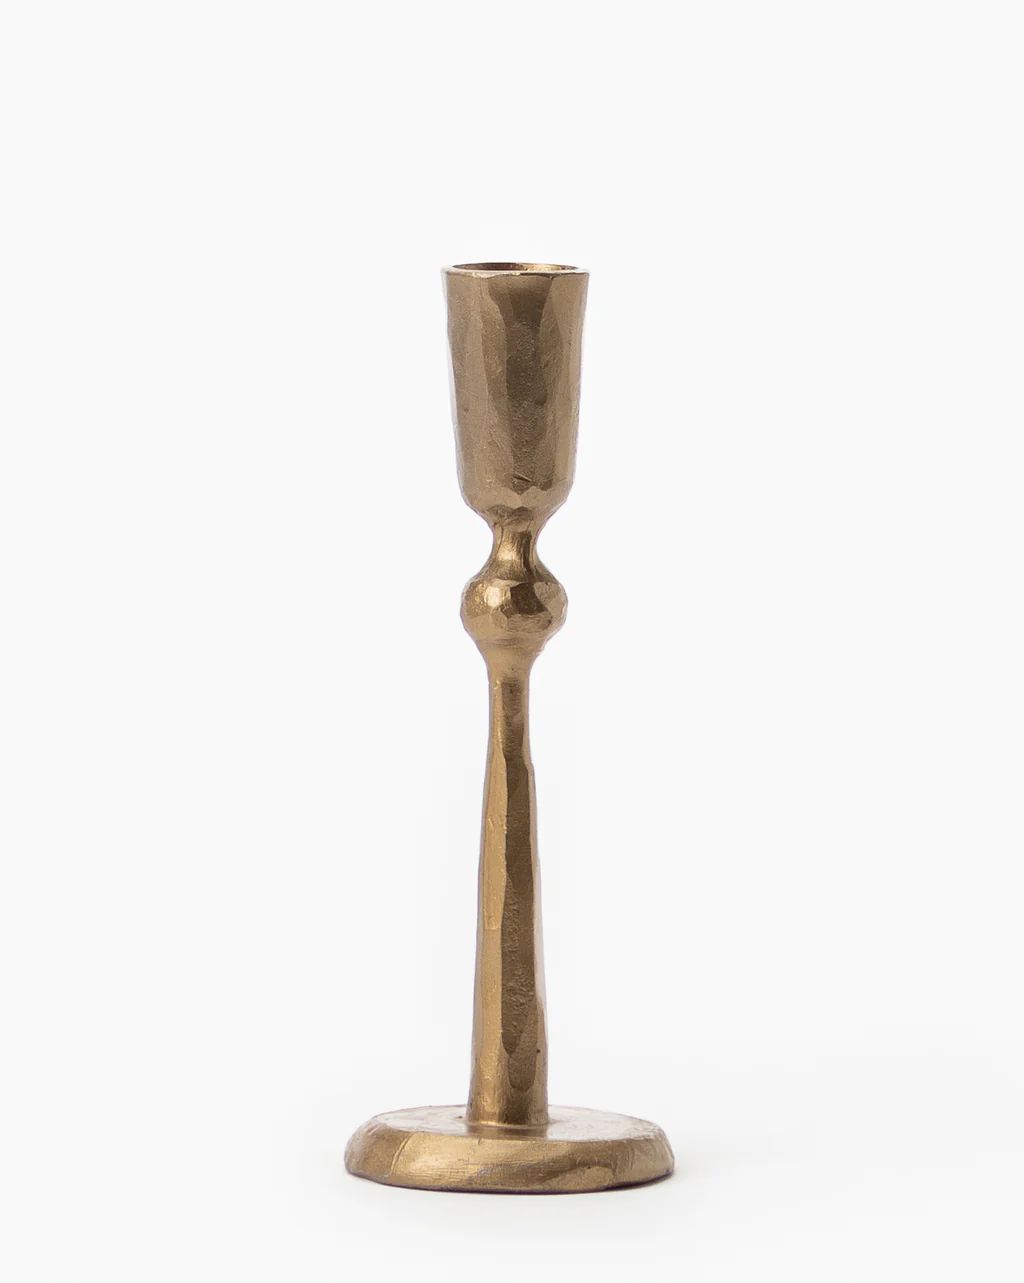 Antique Brass Taper Candle Holder | McGee & Co.